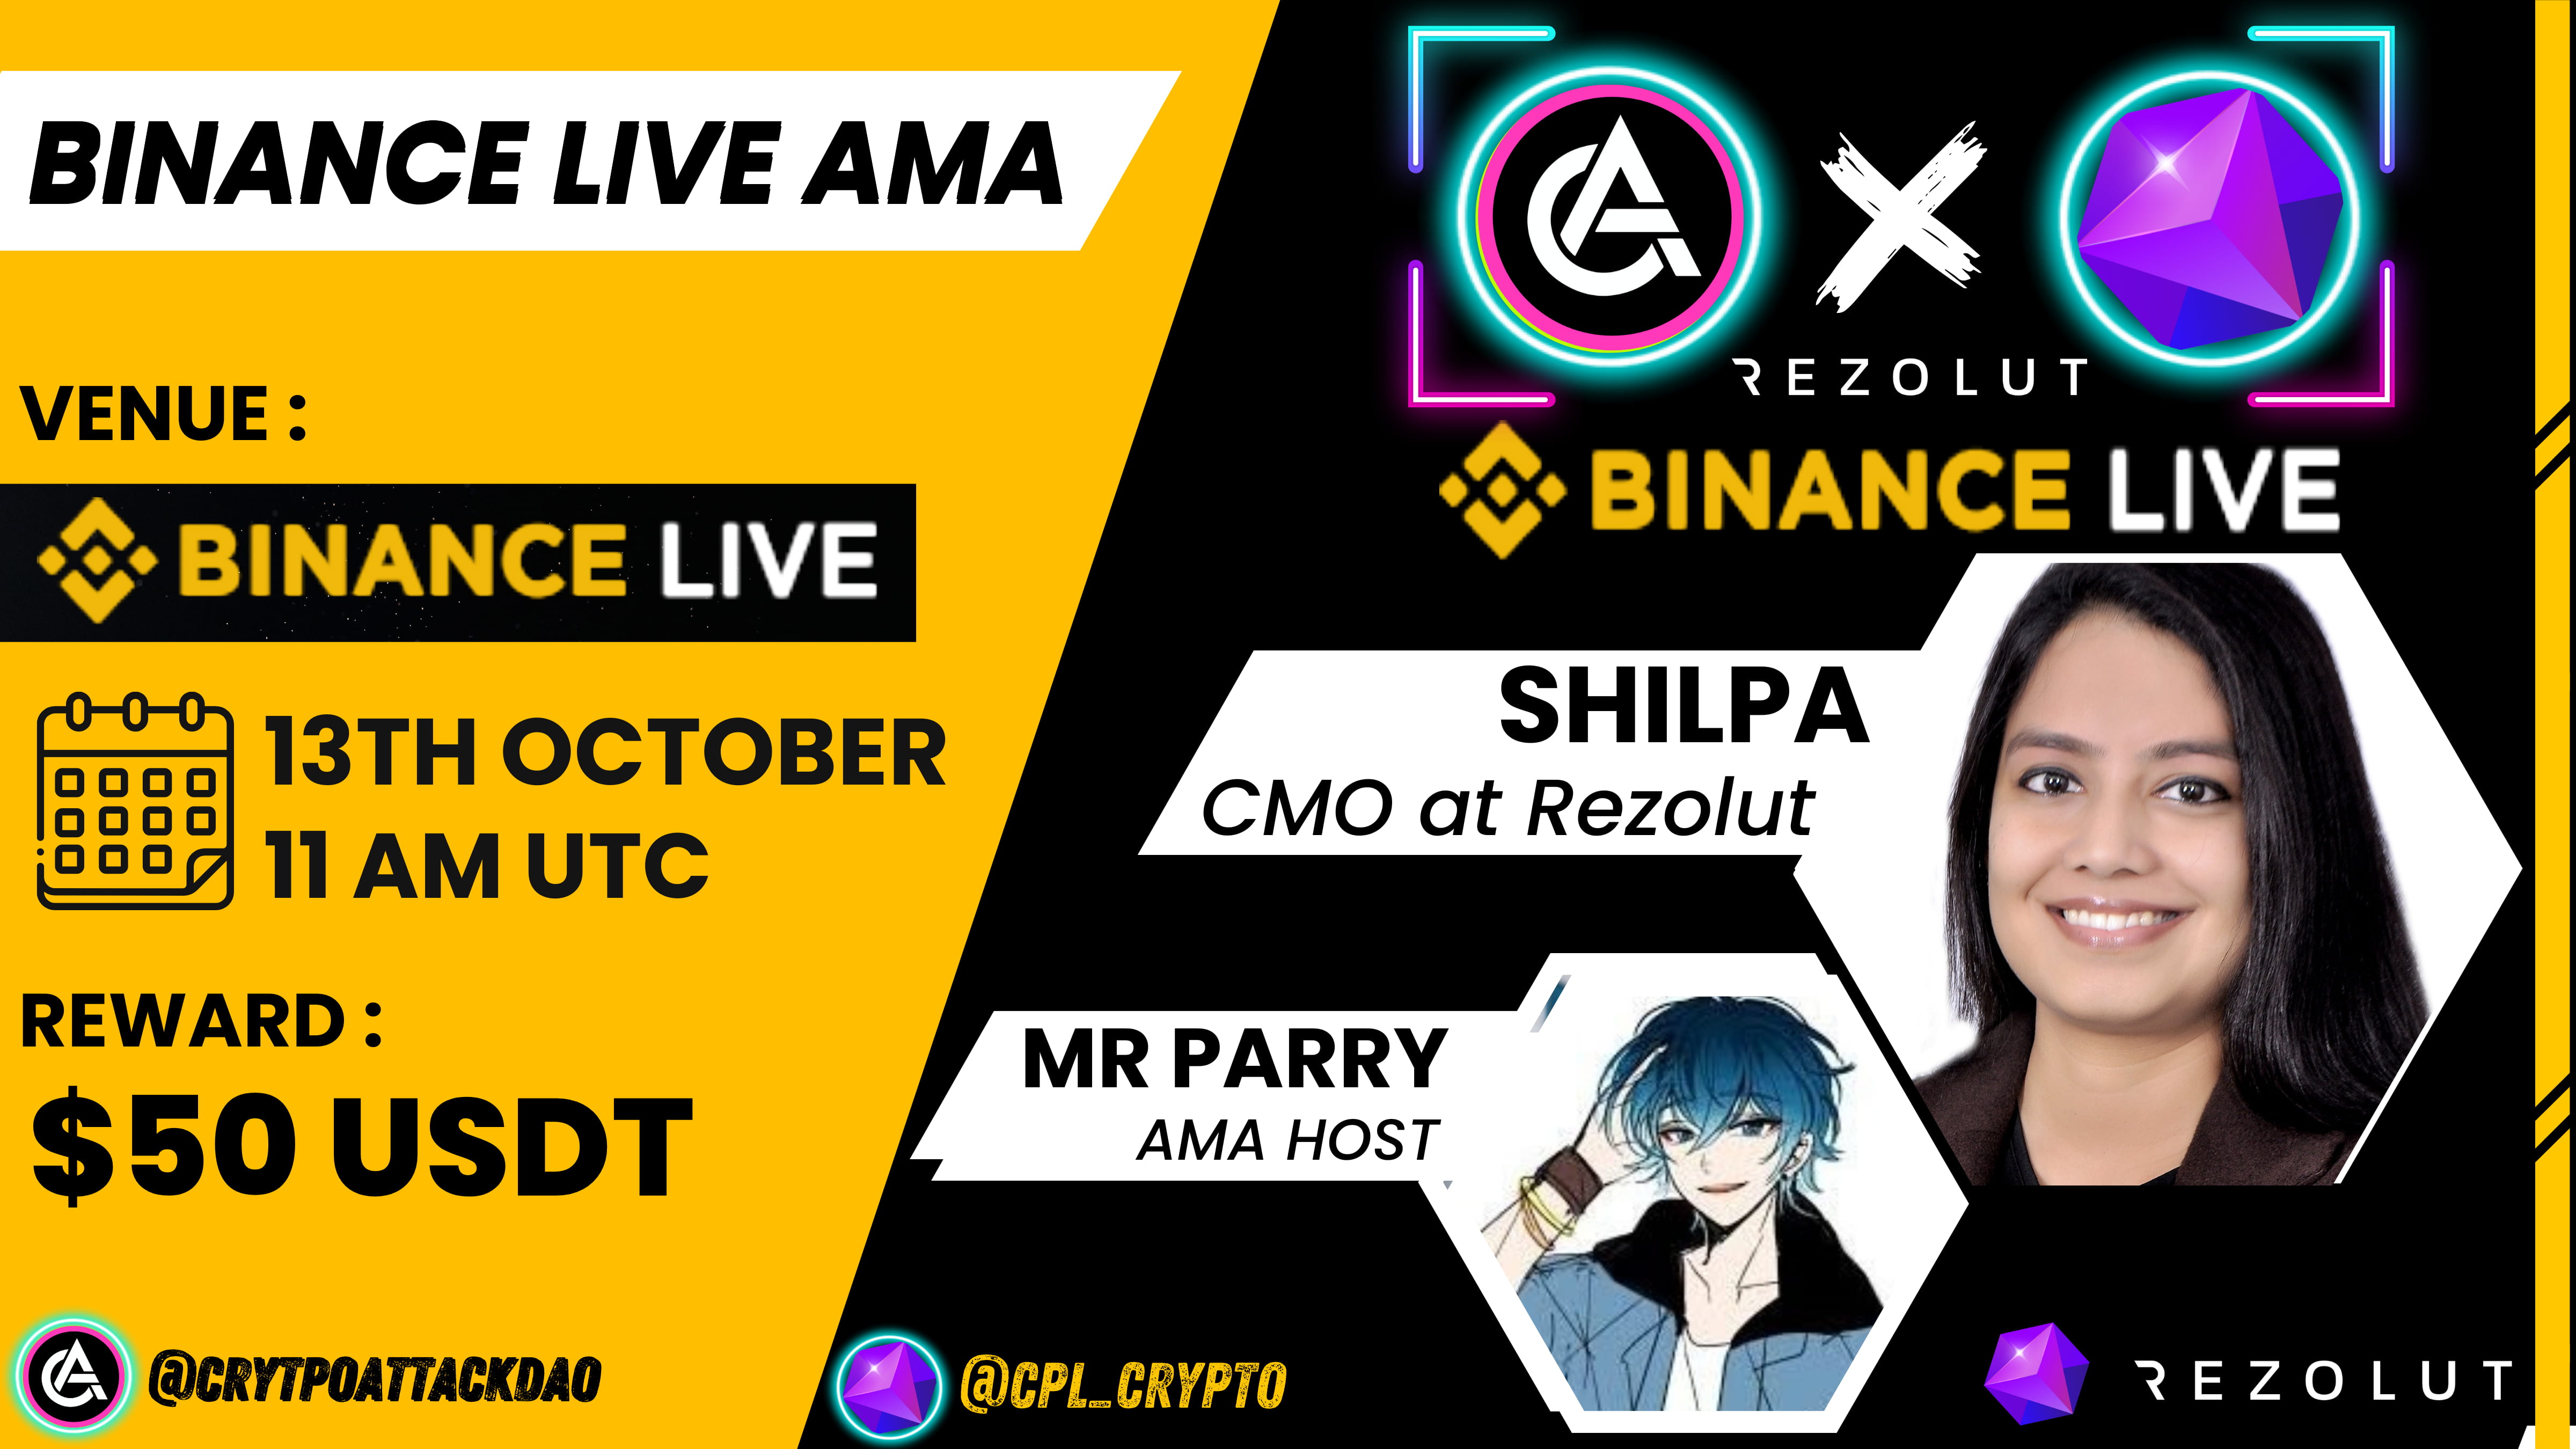 Join the Binance LIVE AMA with Rezolut - A Fireside Chat | 50$ Reward